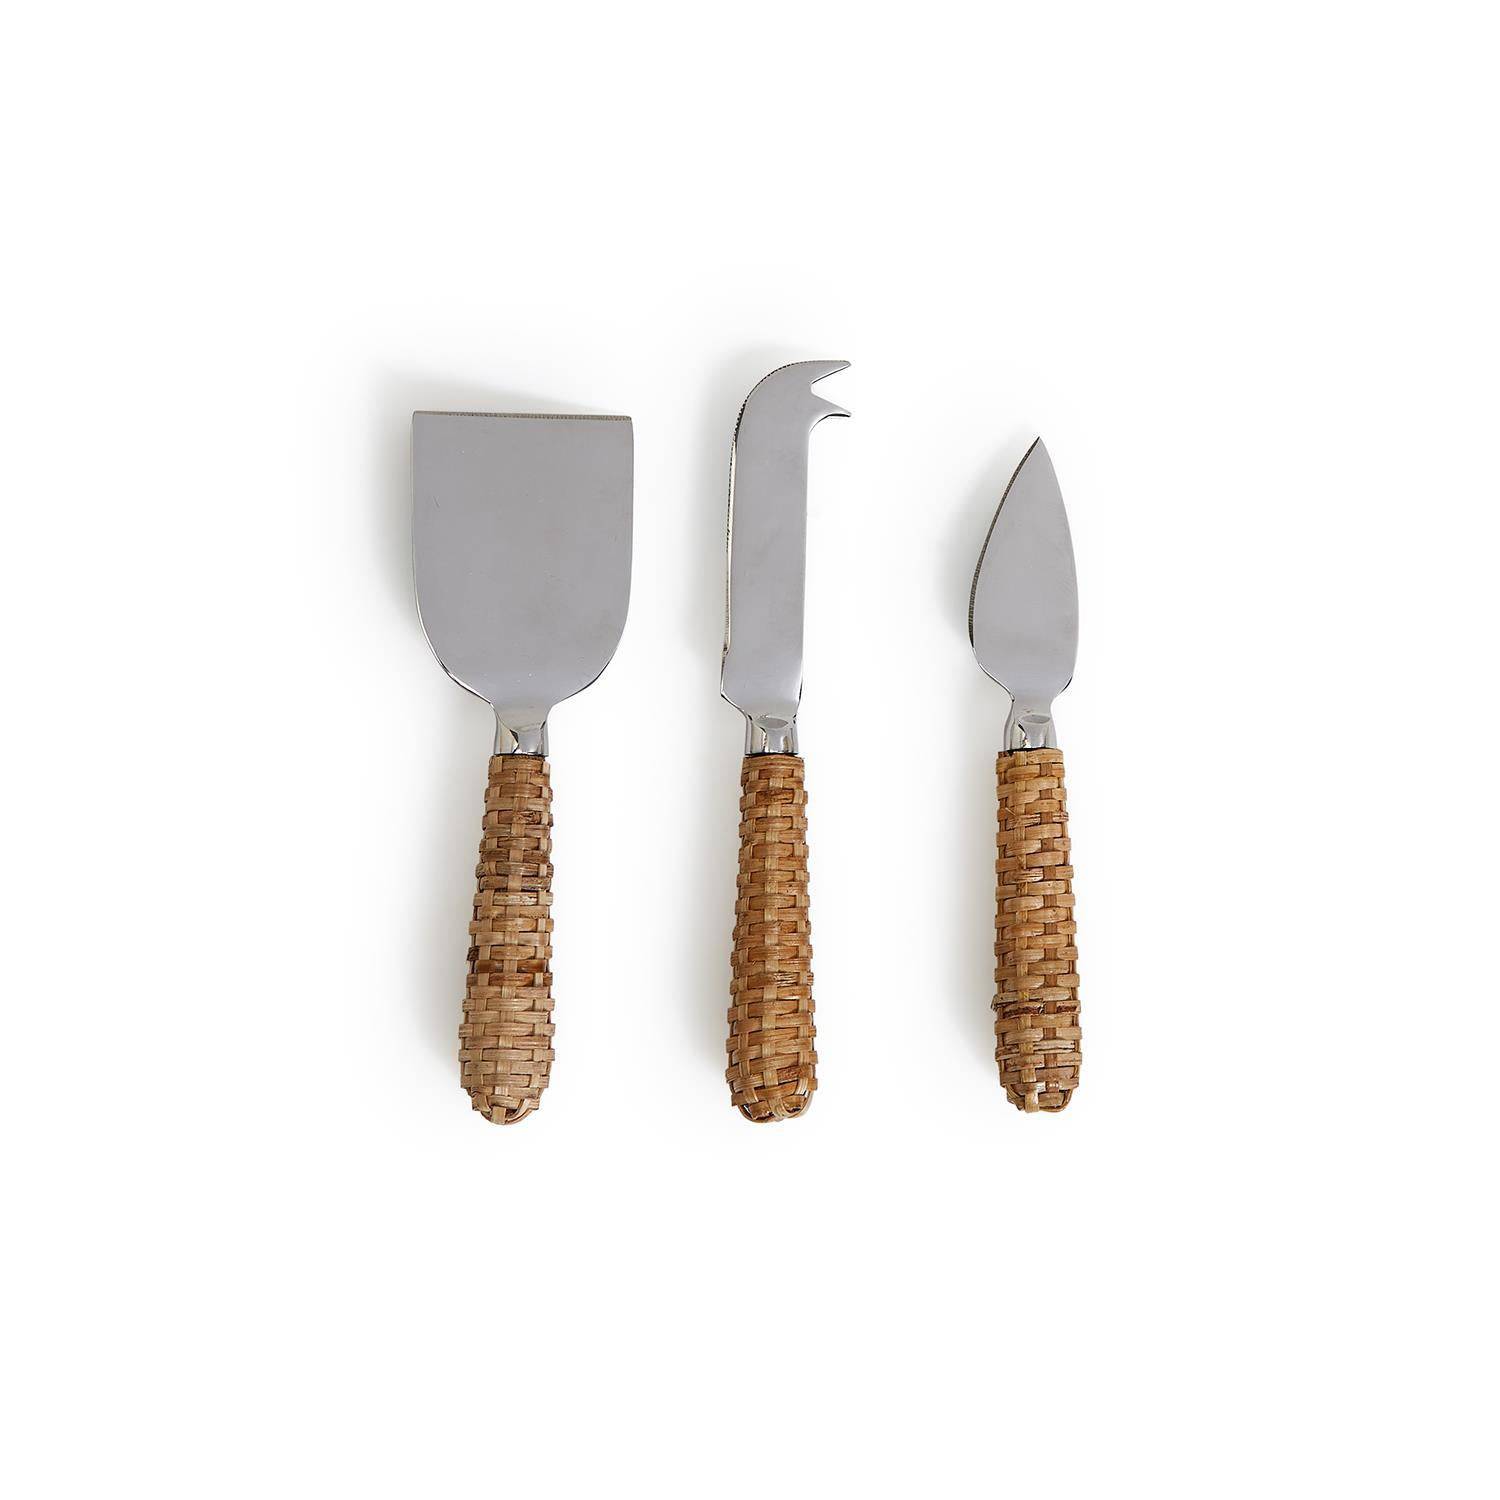 Wicker Weave Set of 3 Cheese Knives - The Preppy Bunny